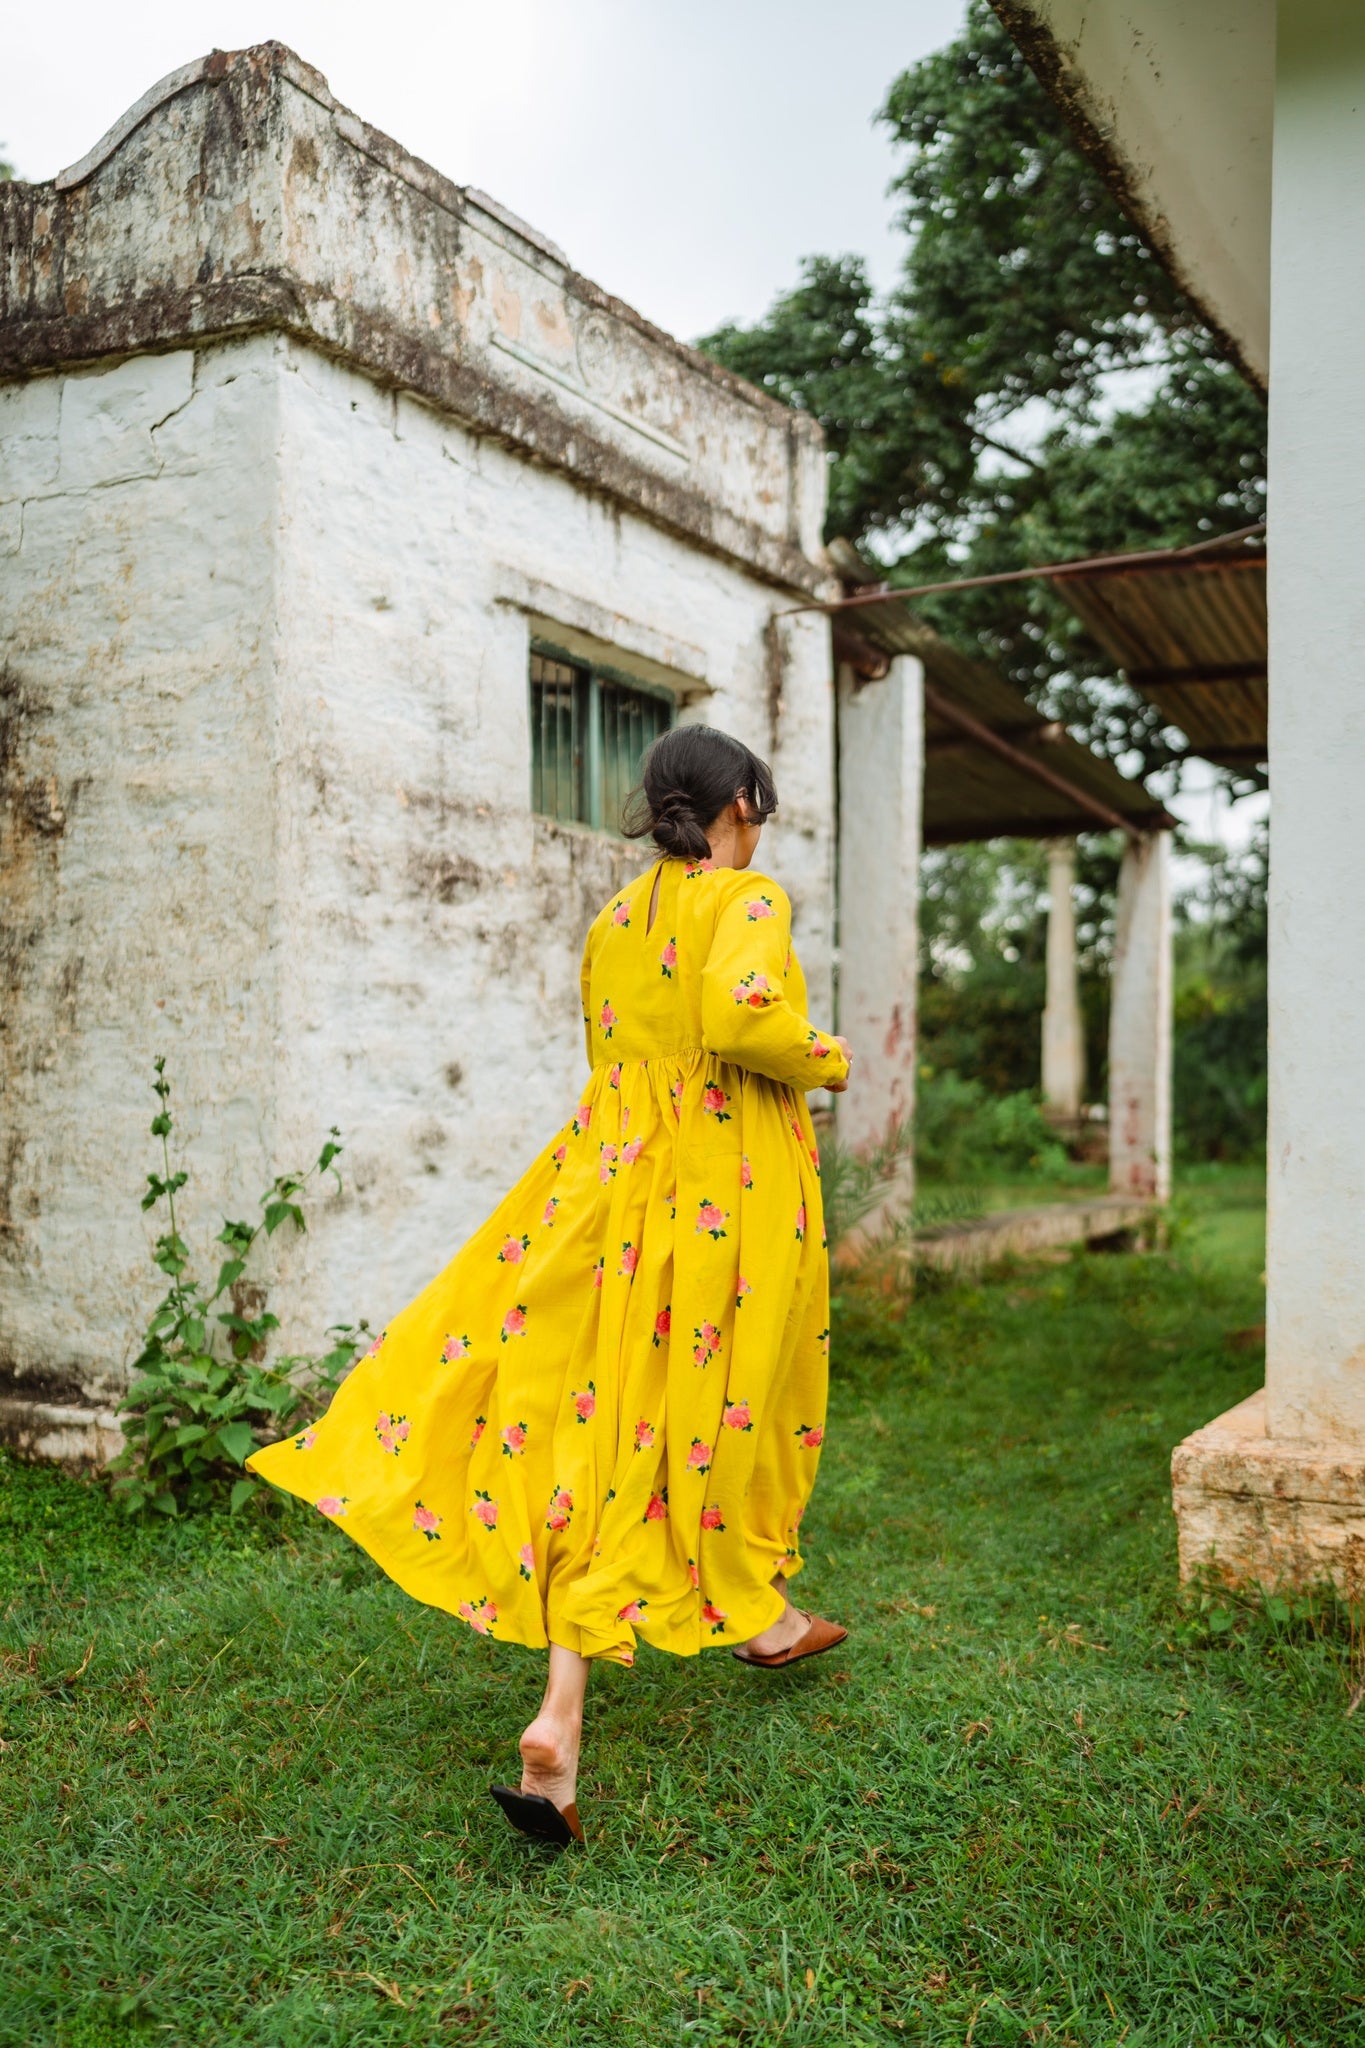 TREEJM's Rangeela Dress in vibrant lime yellow is handwoven cotton perfection, with flowing gathers ideal for sunny days. Enjoy its comfort and distinct print.